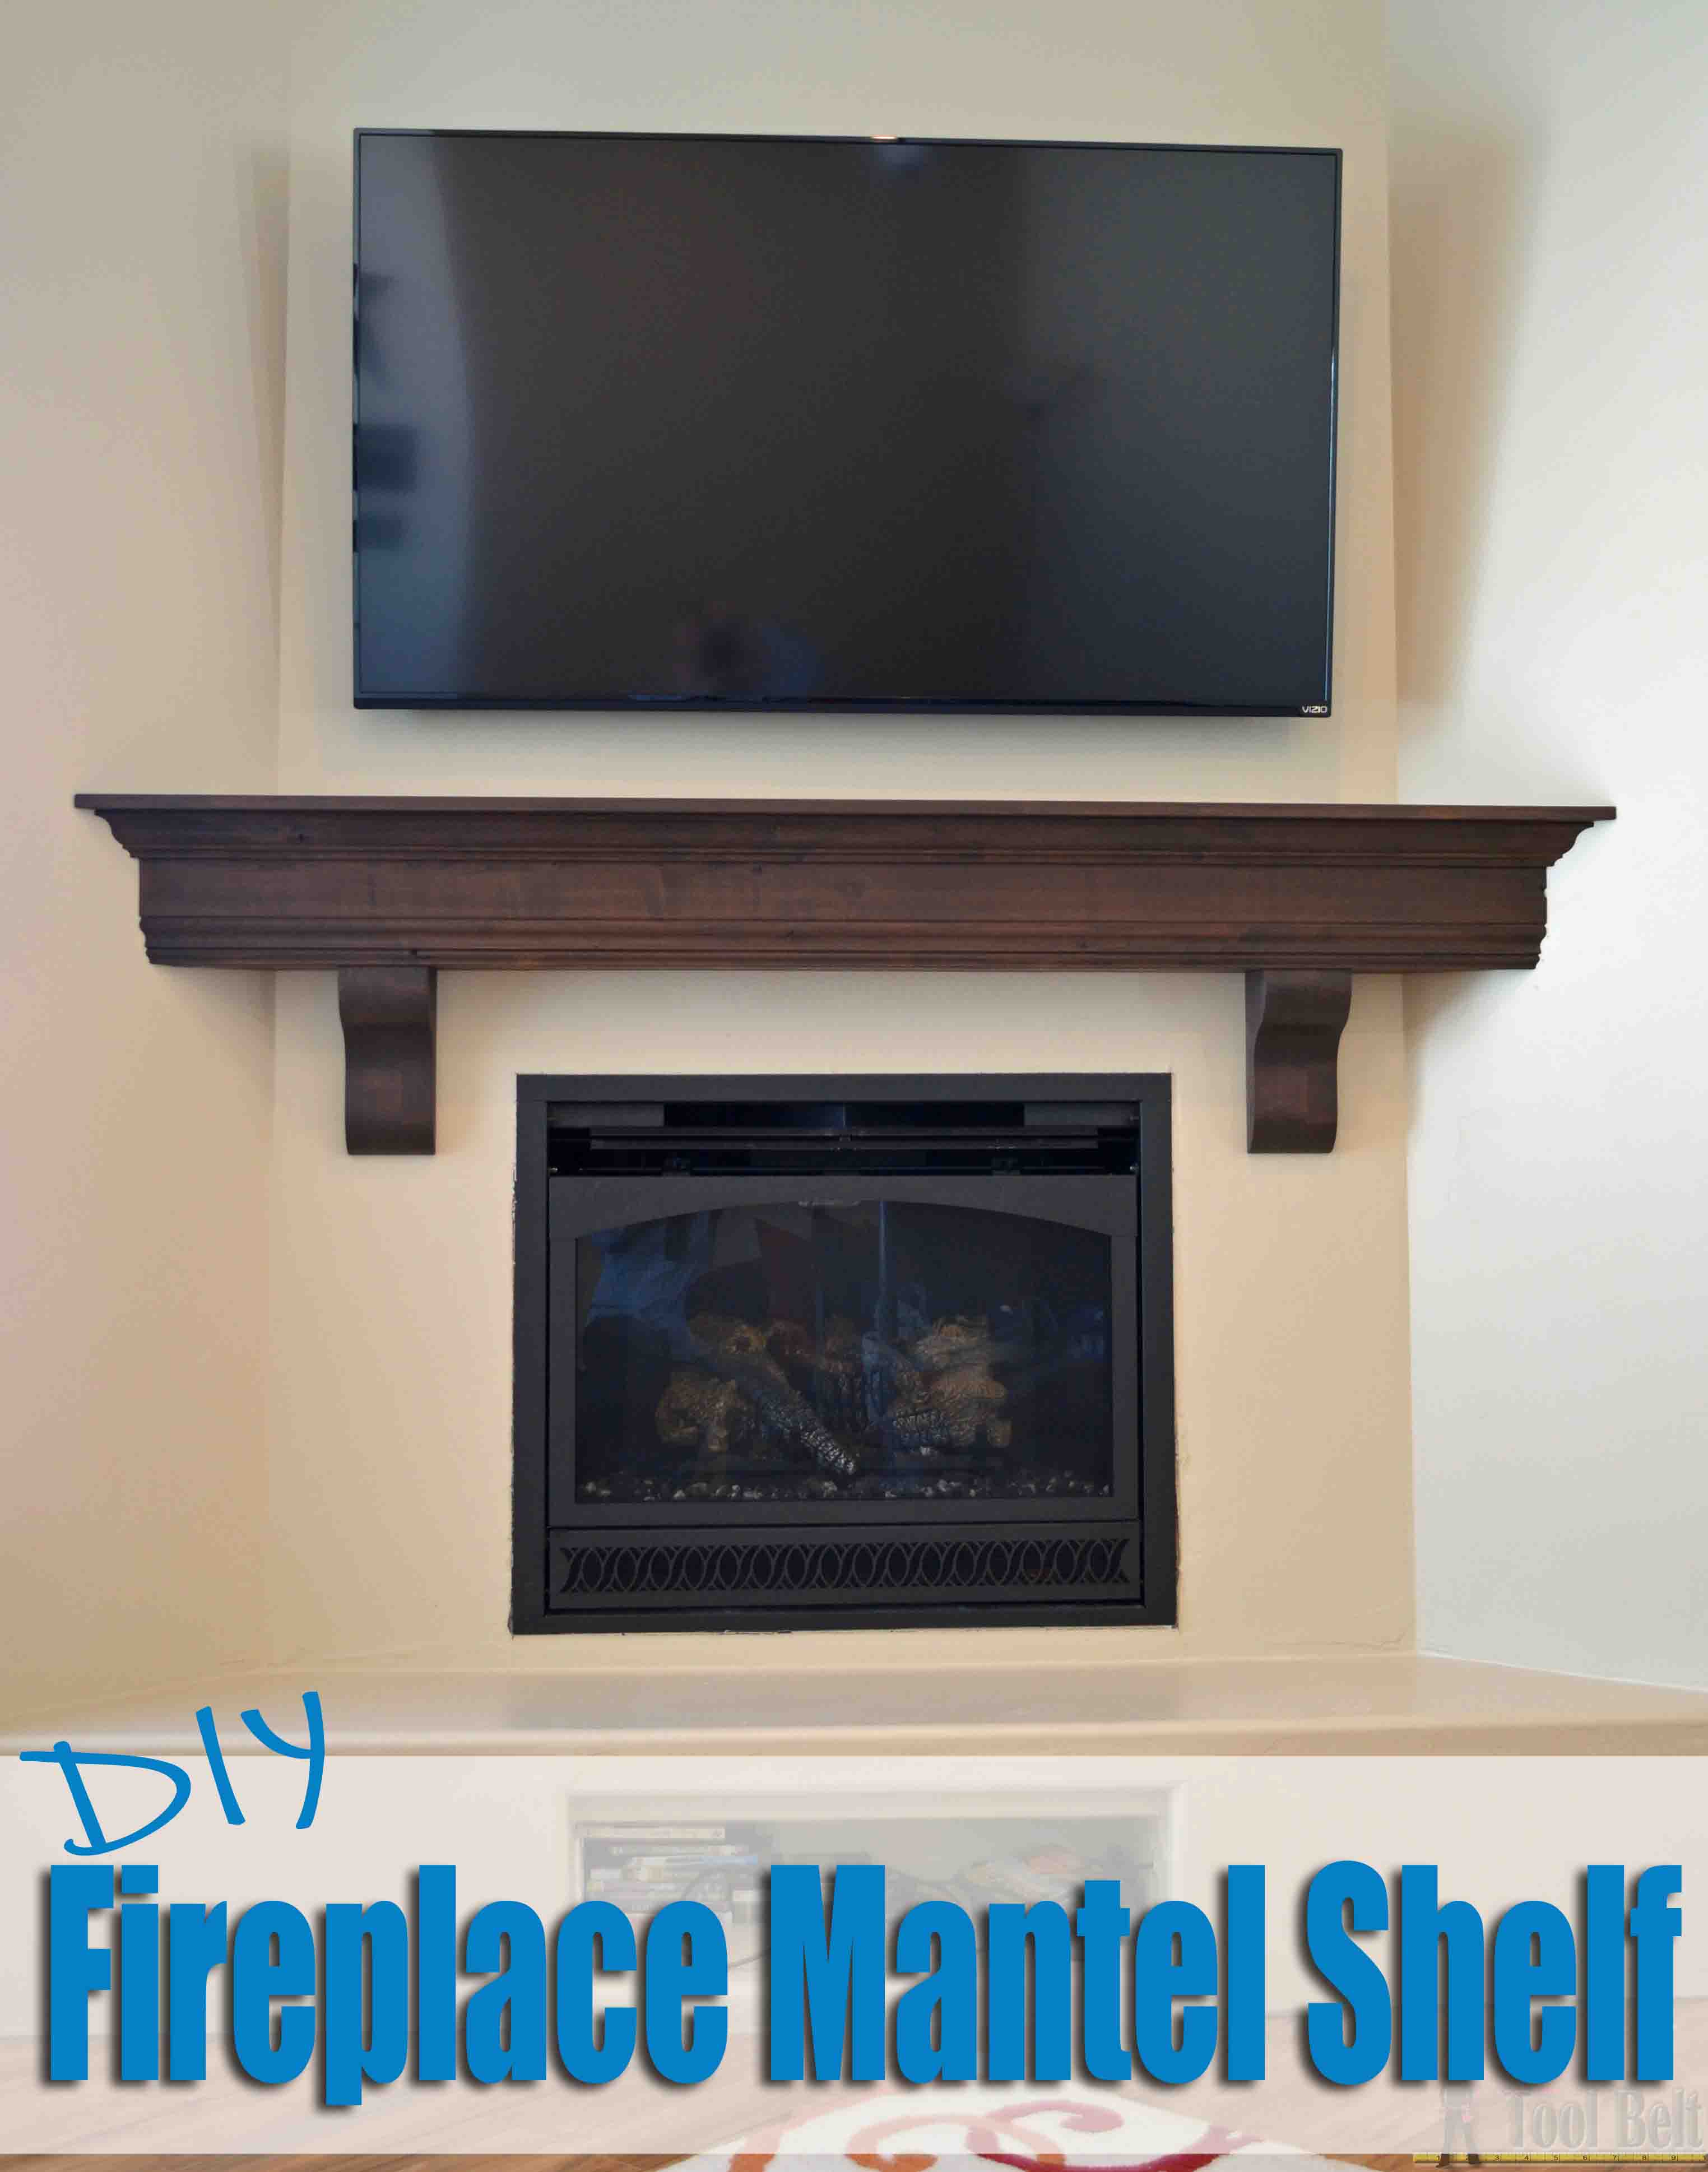 diy fireplace mantel shelf her tool belt plans floating create that room focal point you been dreaming about ribba shelves from ikea receiver wall top garage storage systems